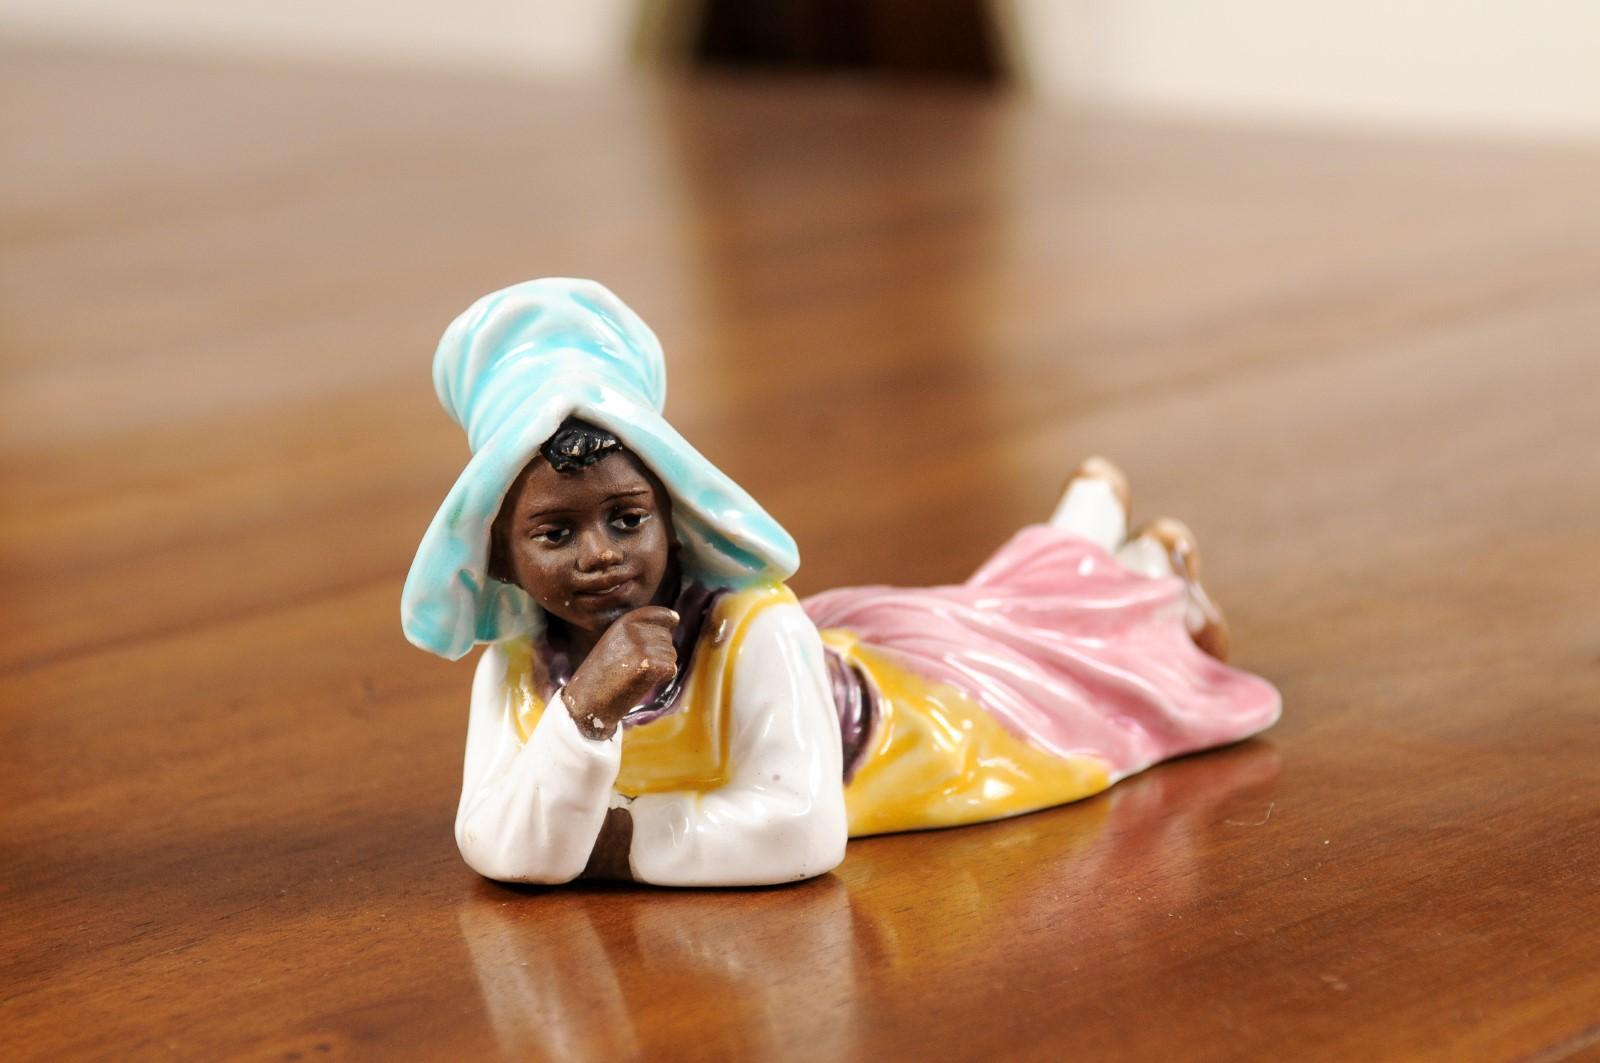 Petite English Porcelain Figurine Depicting a Young Girl Laying on the Ground In Good Condition For Sale In Atlanta, GA